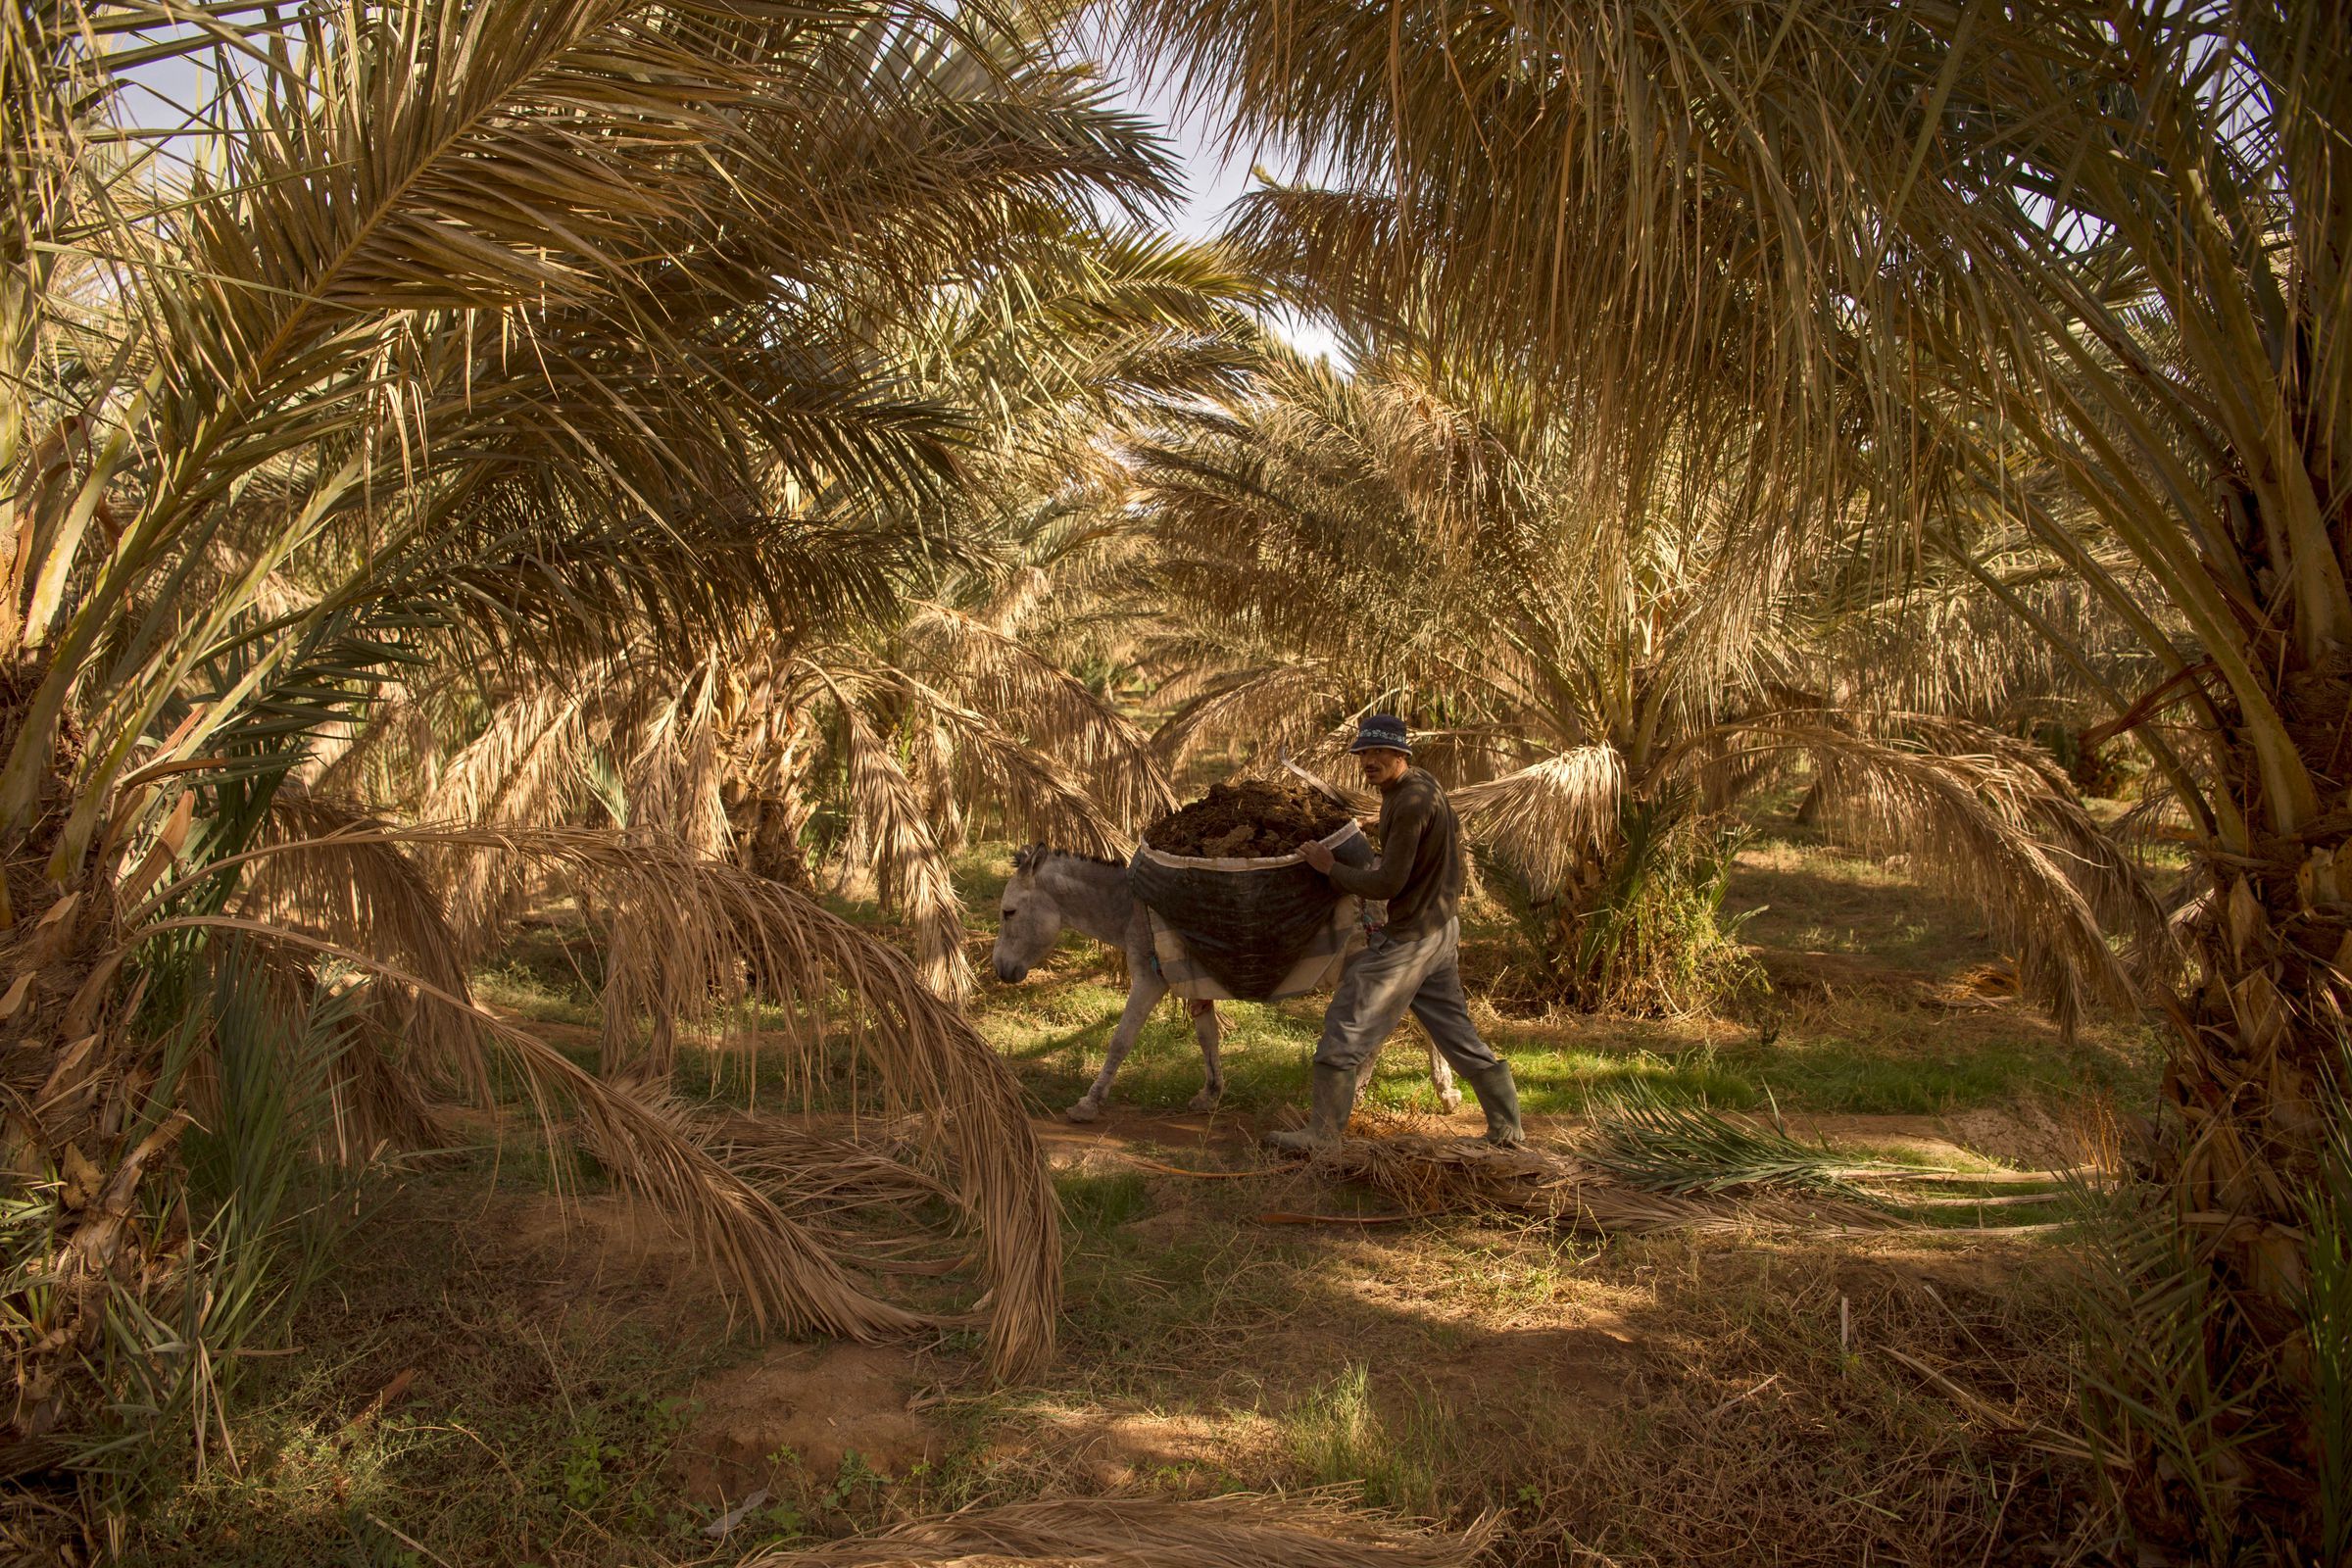 A man and donkey walk through drying palm fronds.